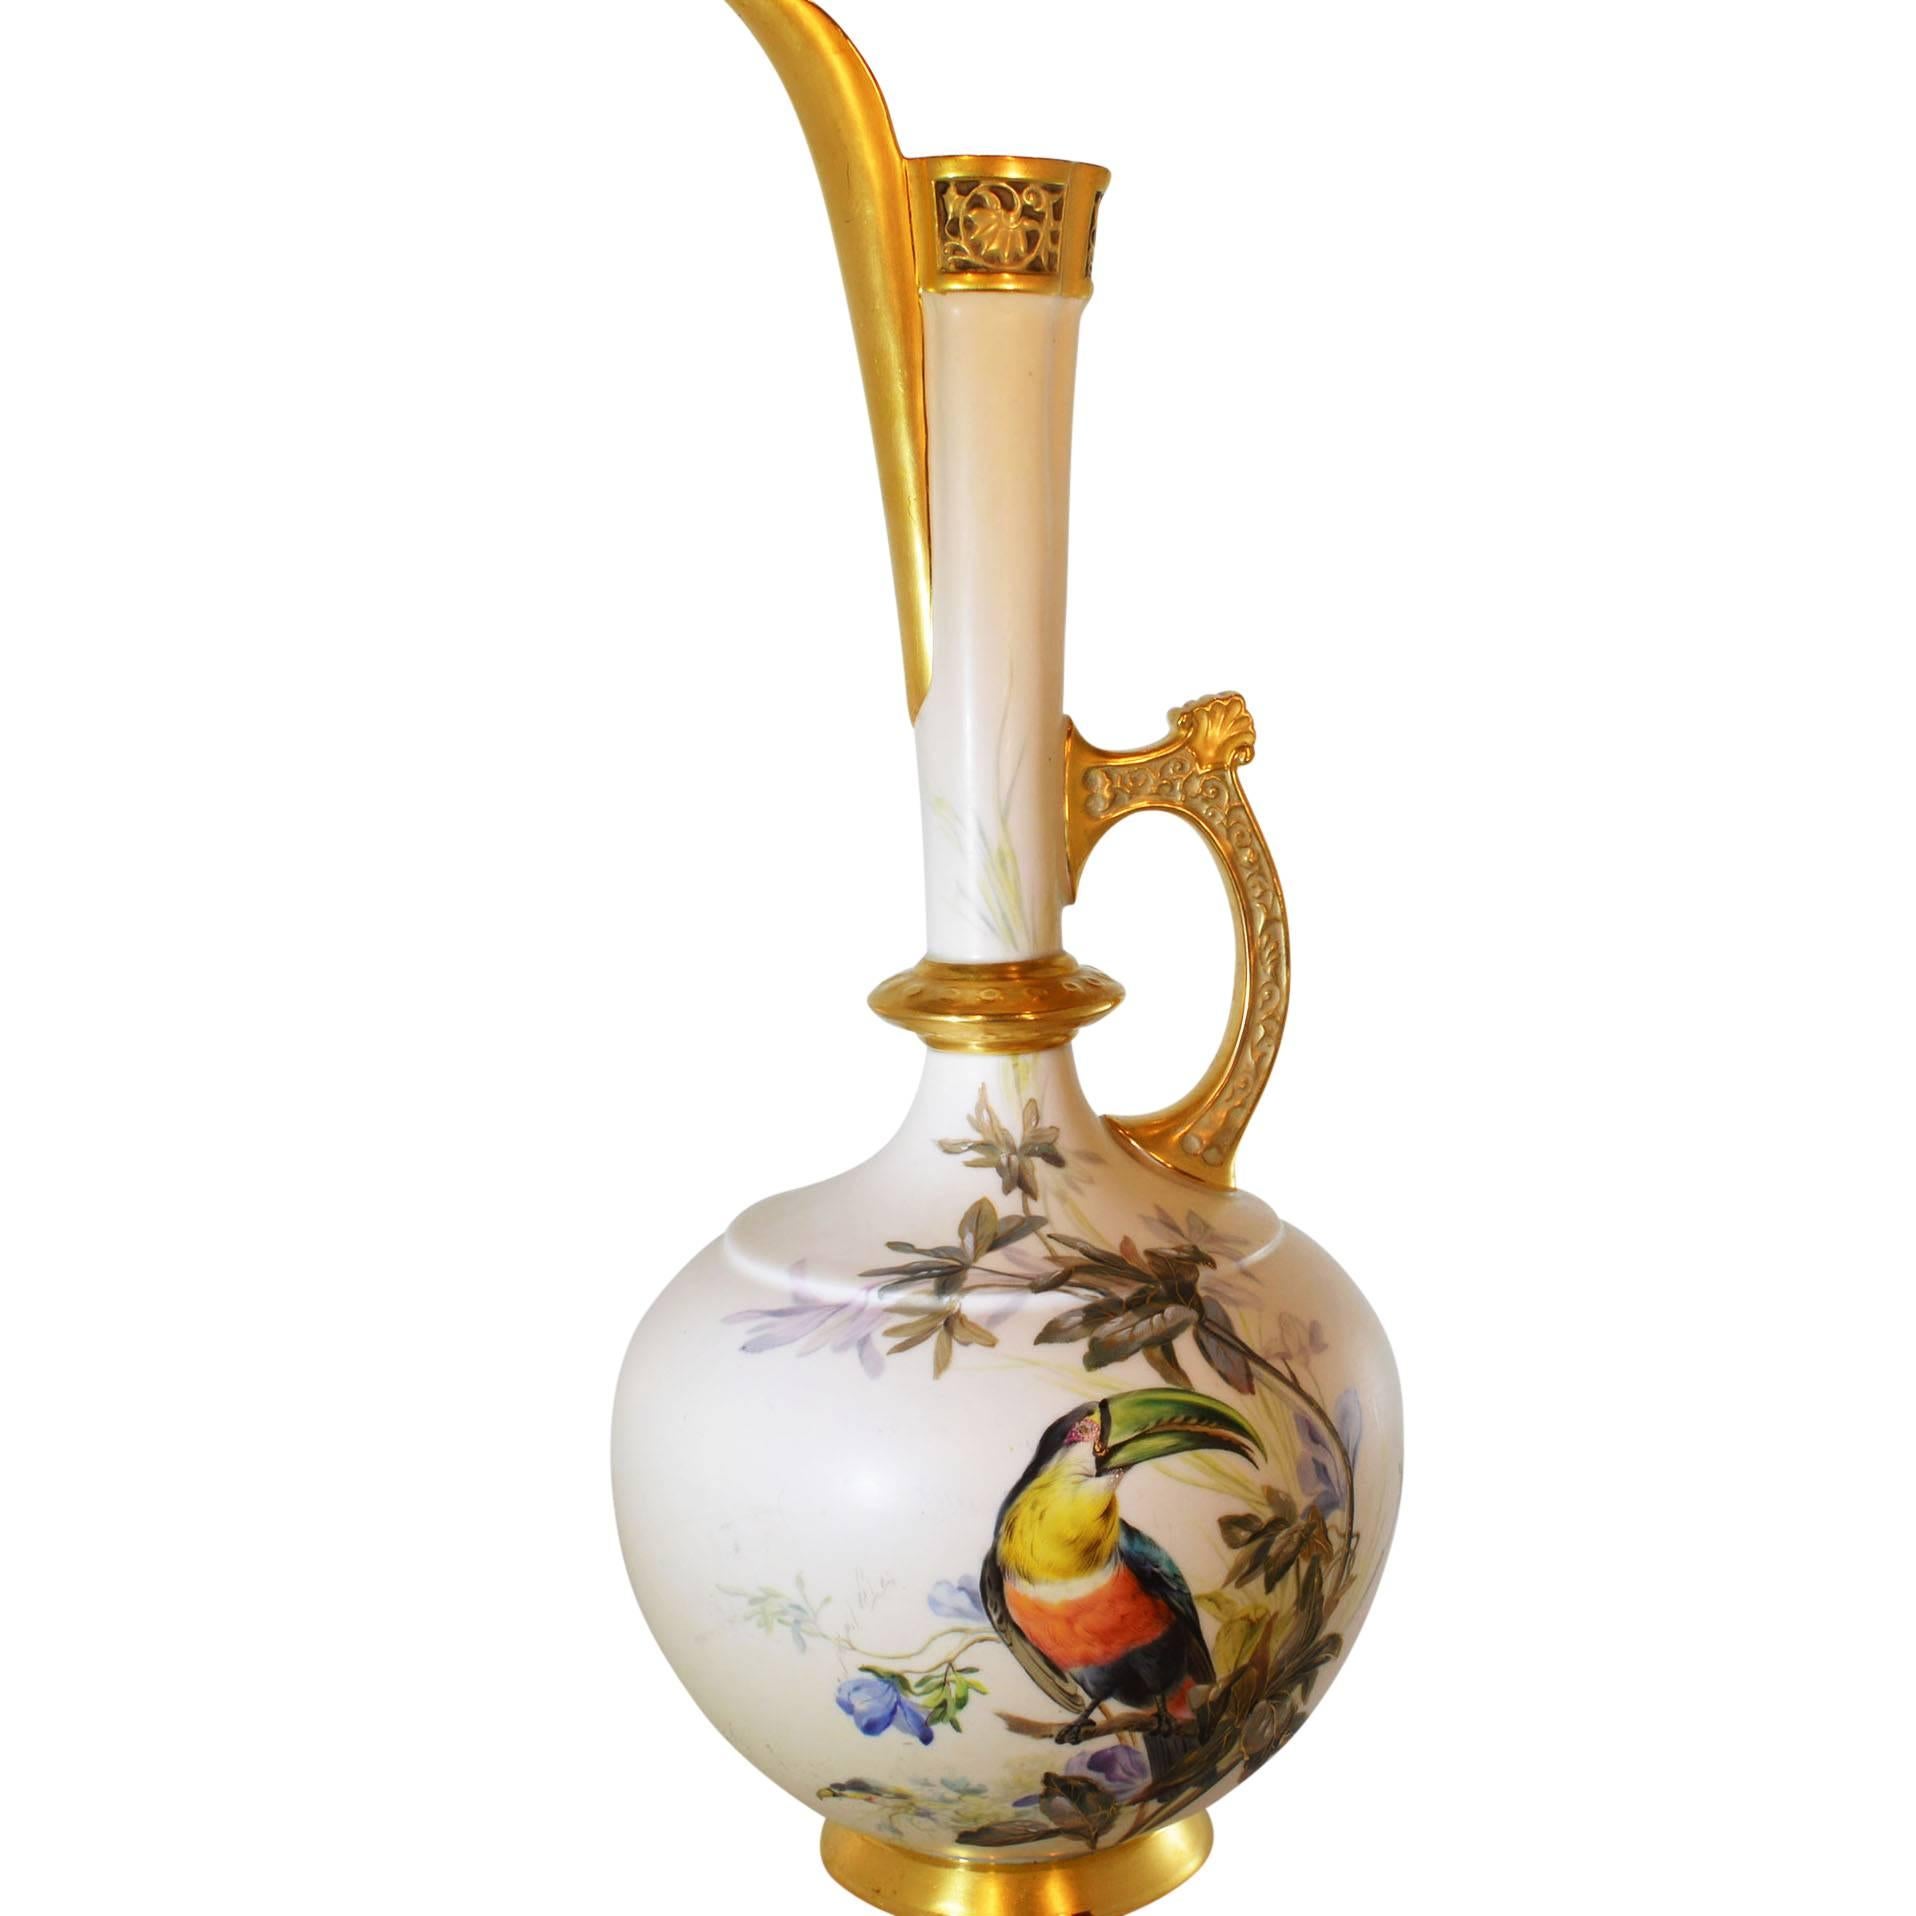 Porcelain Tall Hand-Painted Toucan Pitcher with Gold Spout